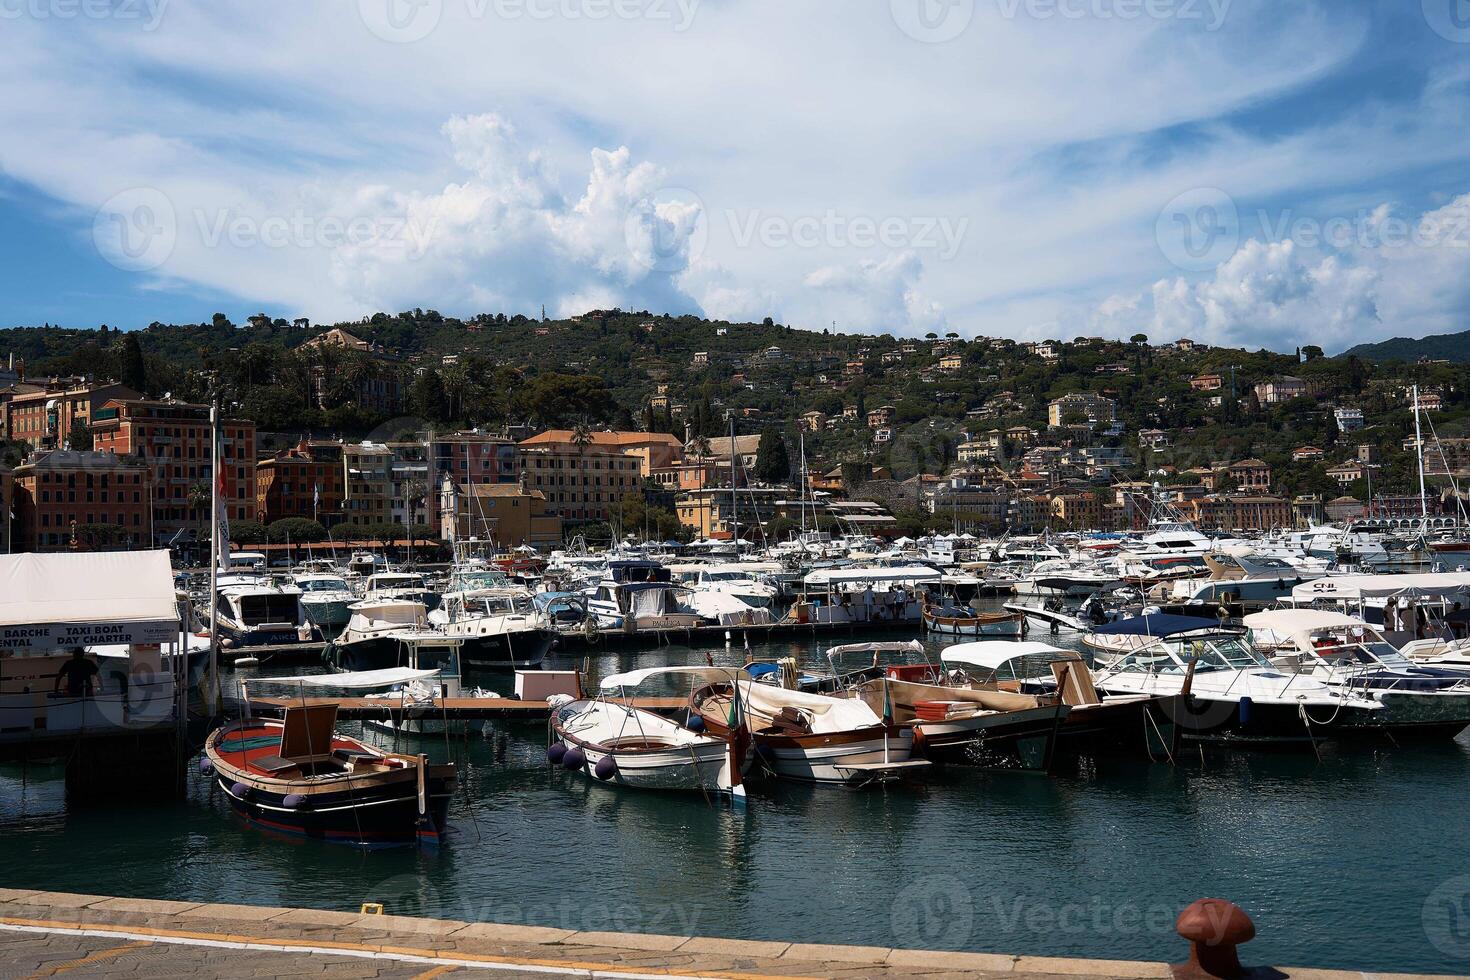 parked boats in an Italian resort town photo